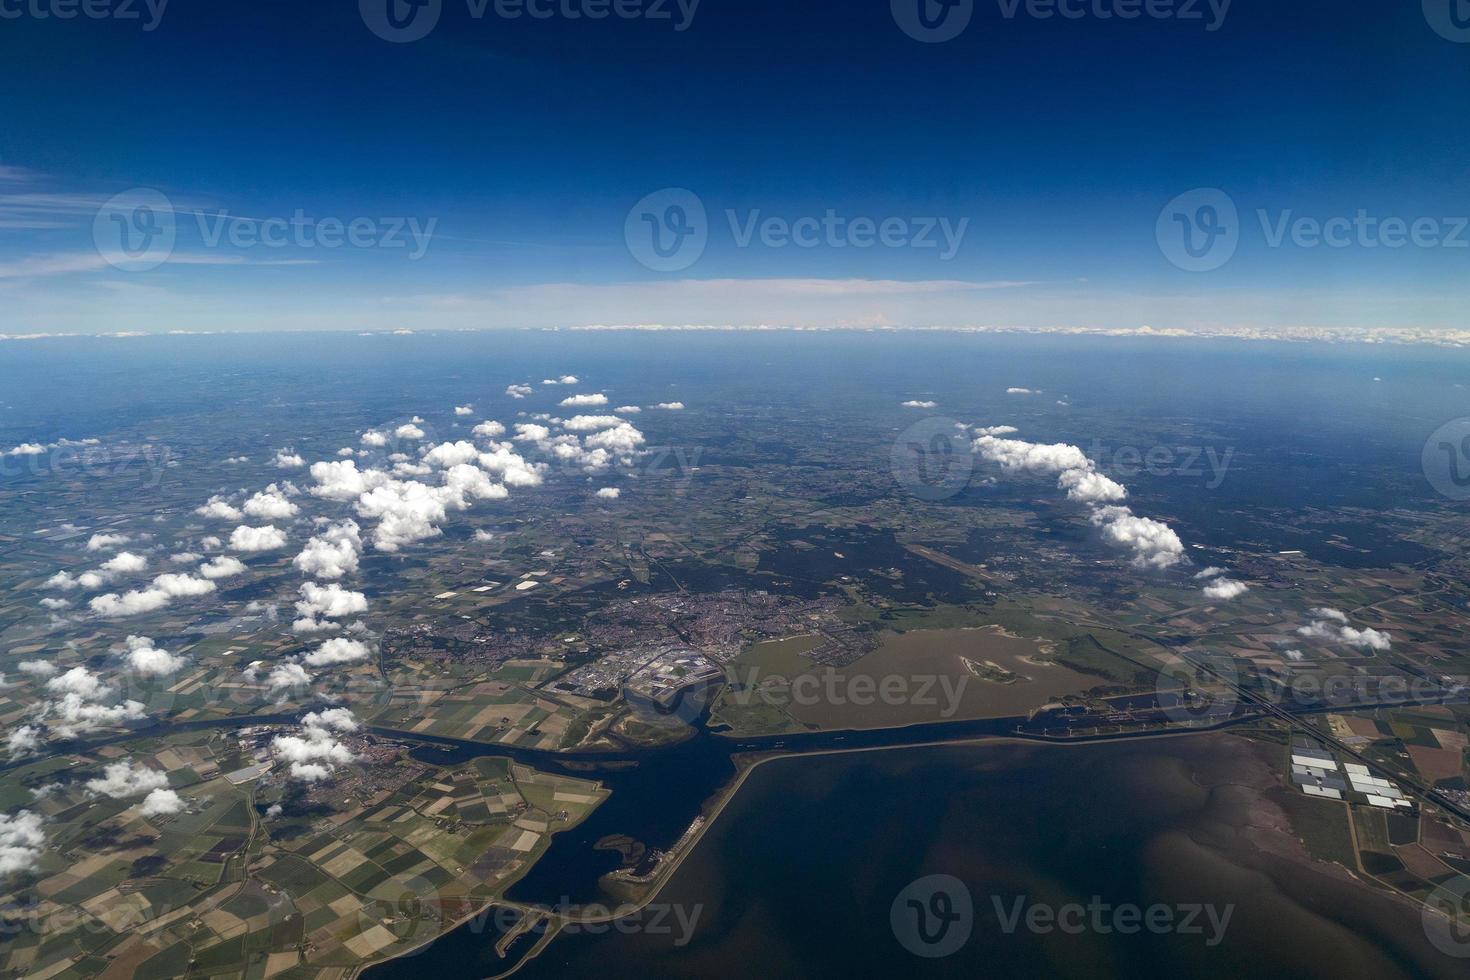 Rotterdam channels sea aerial view panorama photo